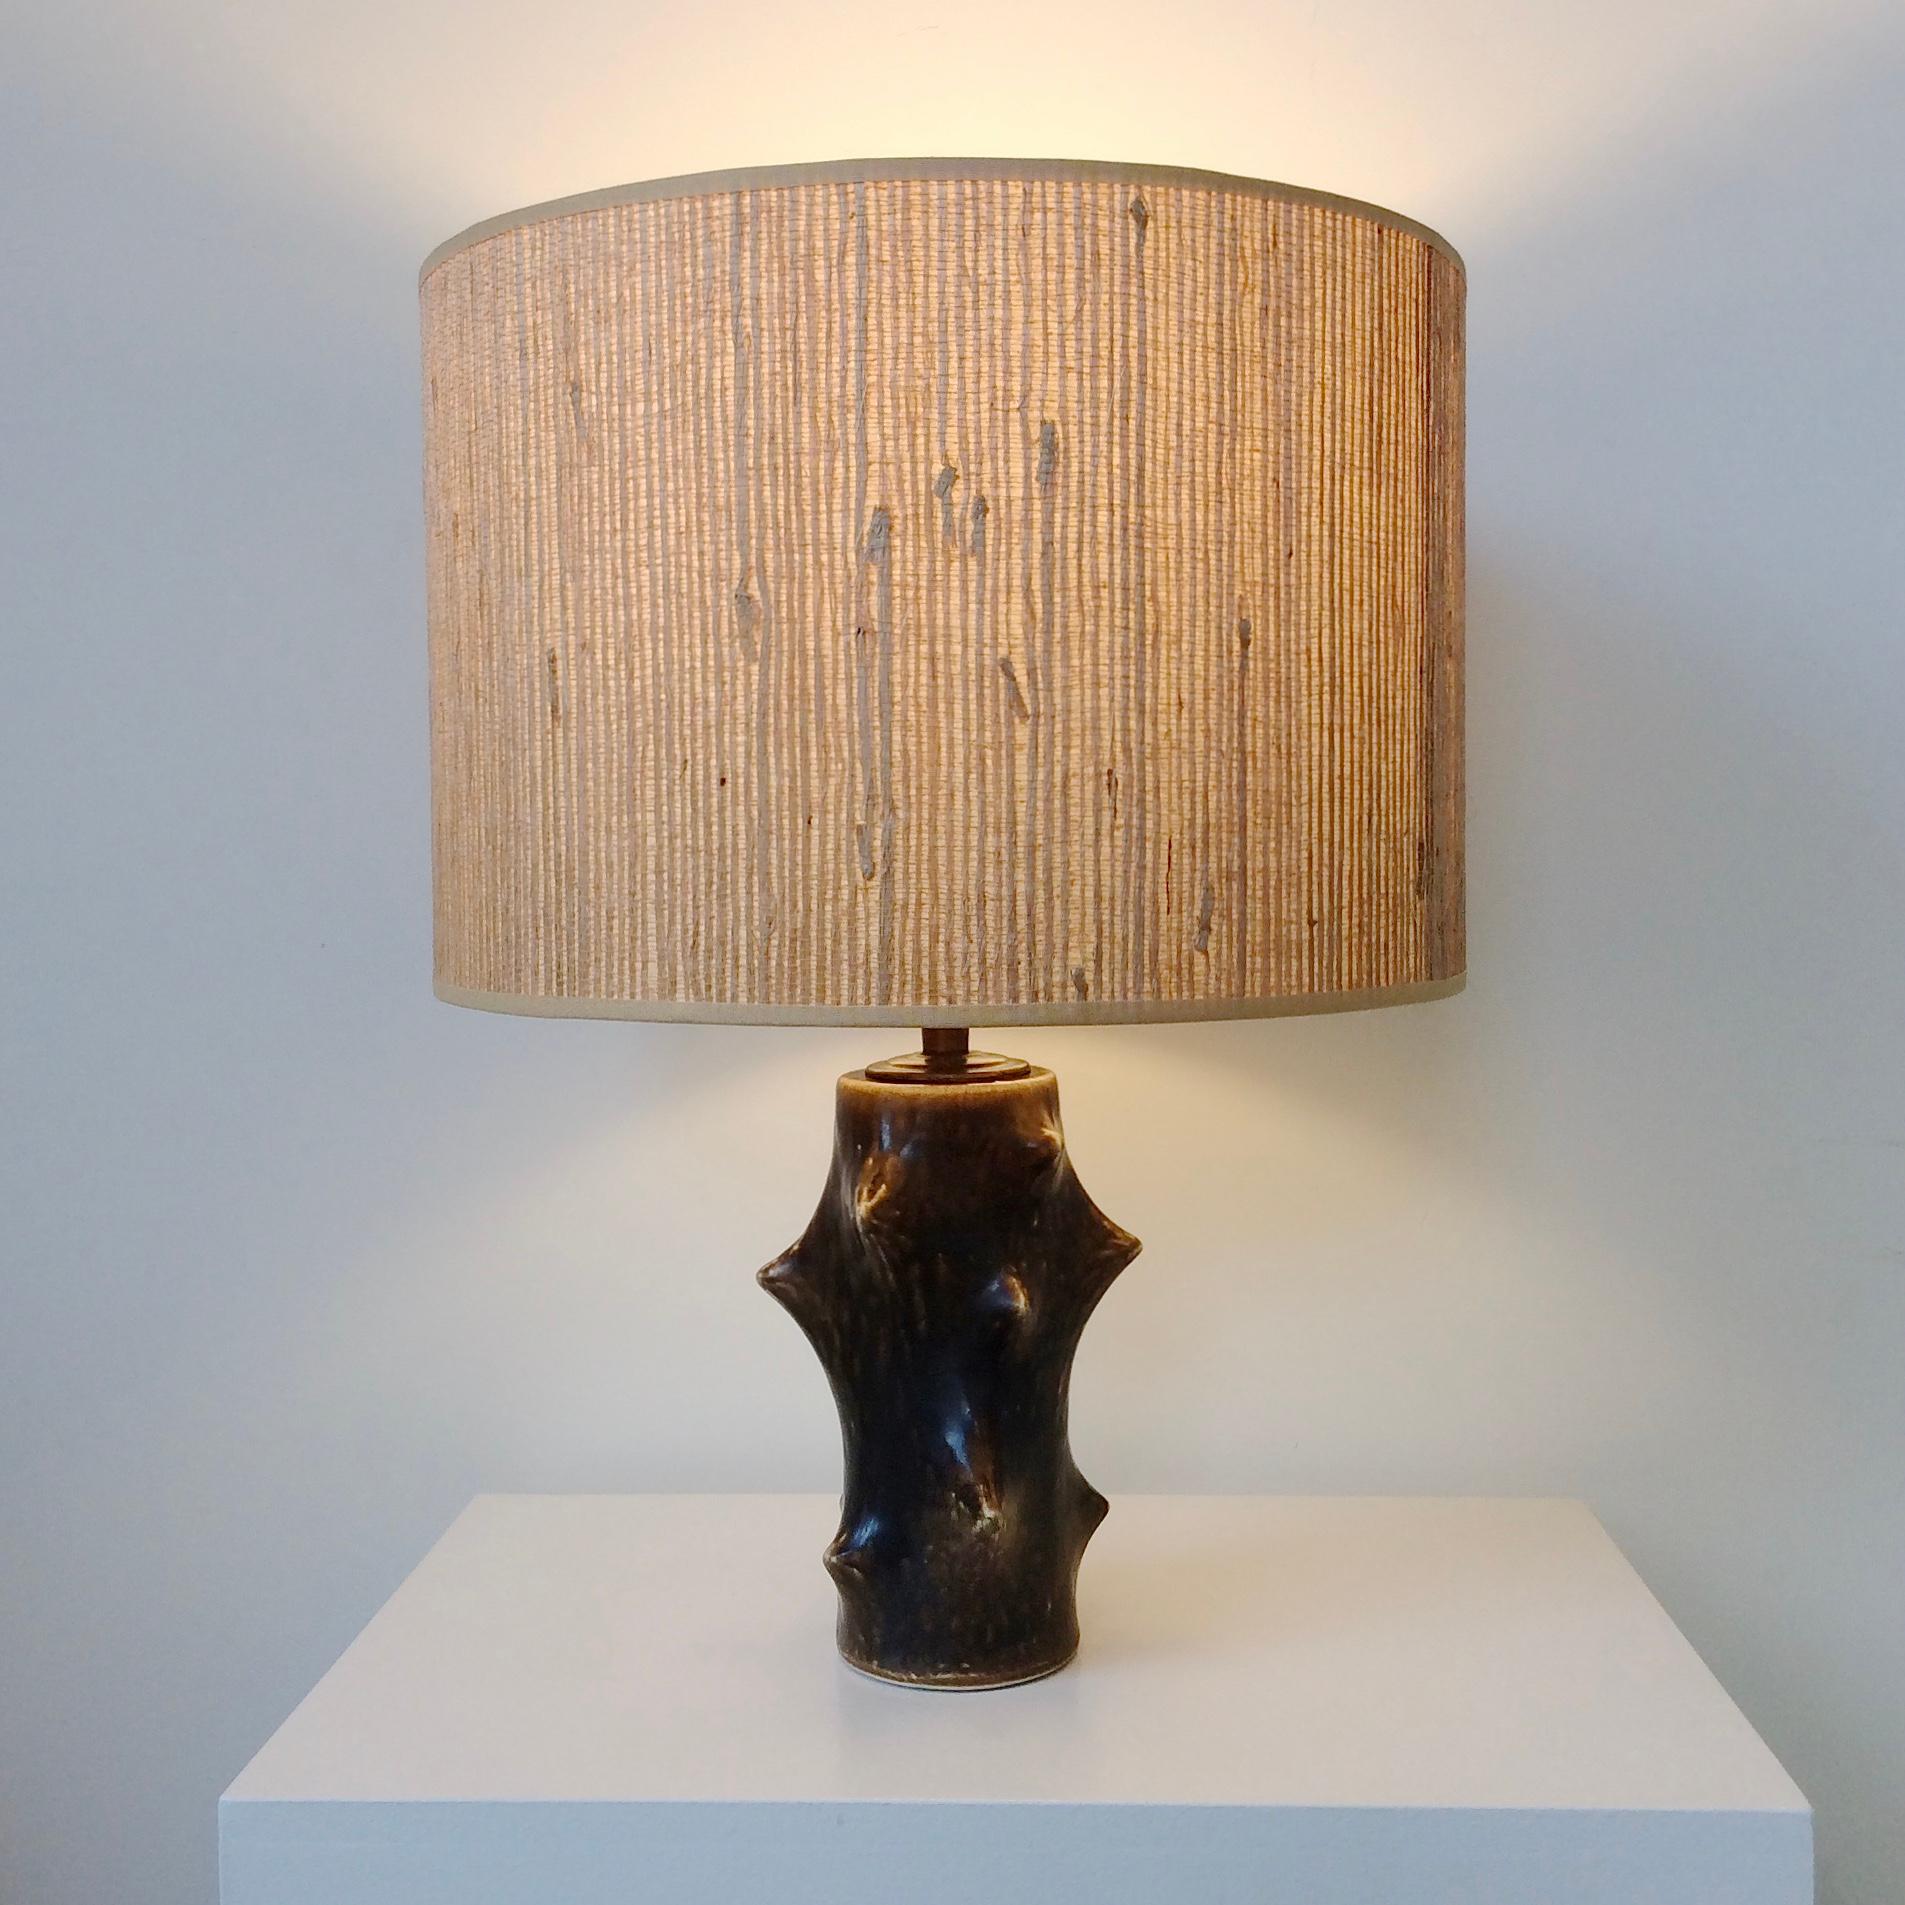 Knud Basse Thorn table lamp for Michael Andersen & Son, circa 1960, Denmark.
Brown glazed ceramic, new straw fabric shade.
Stamped underneath. Rewired. One E27 bulb.
Dimensions: total height : 41 cm, diameter of the shade: 30 cm.
All purchases are